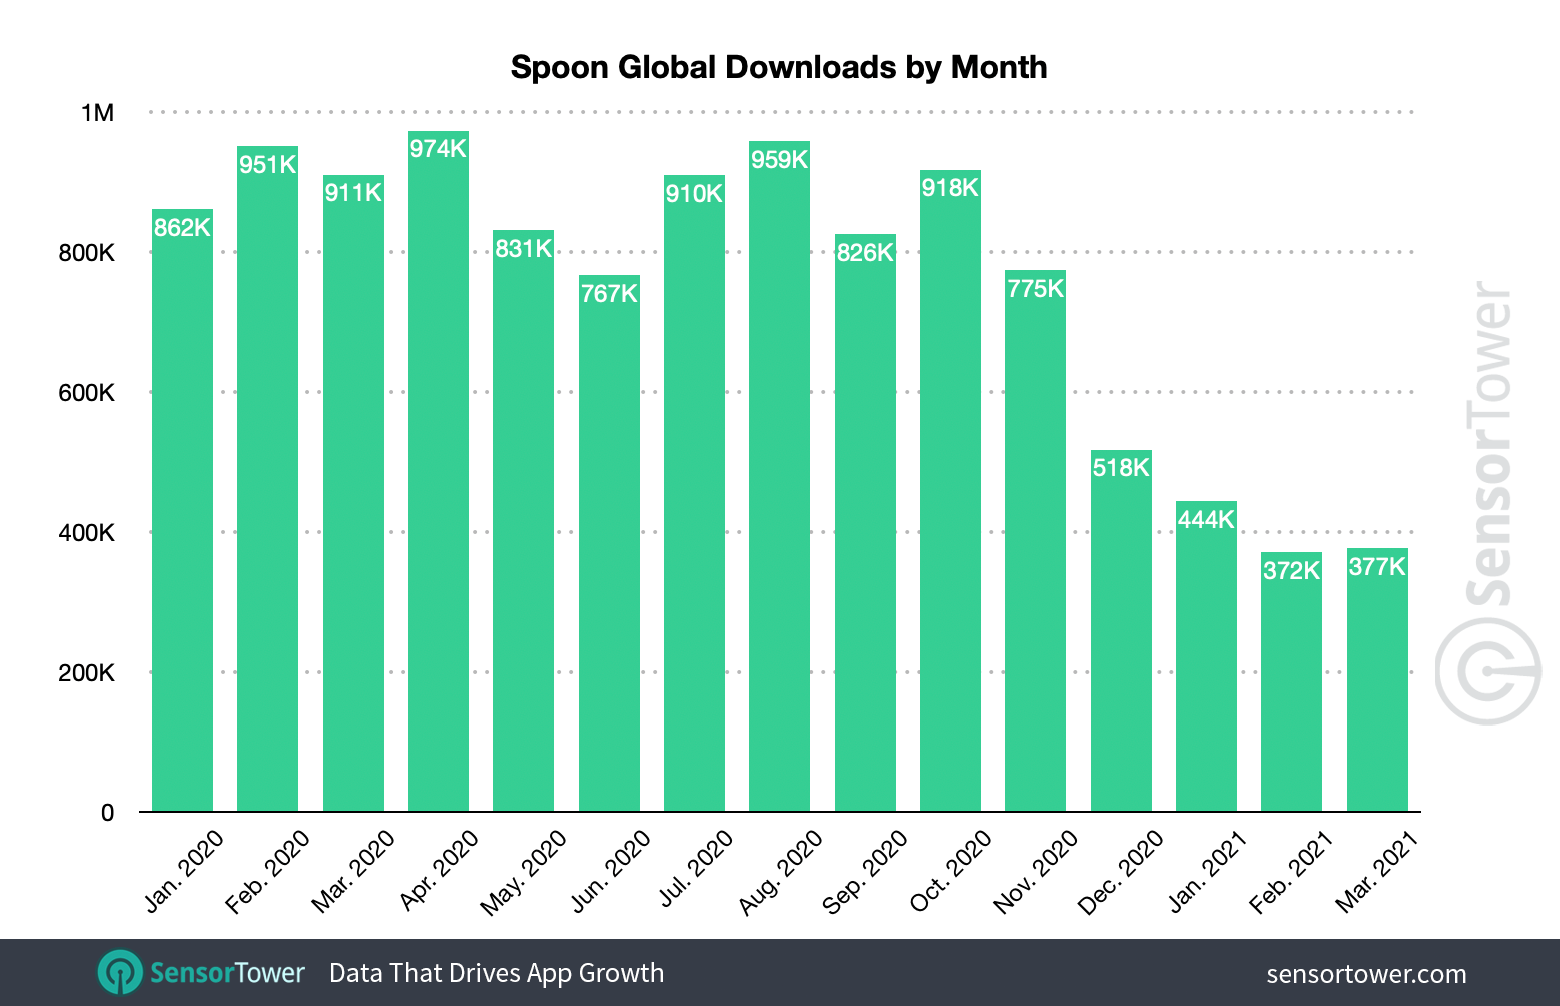 Spoon saw its best-ever month of installs in April 2020.